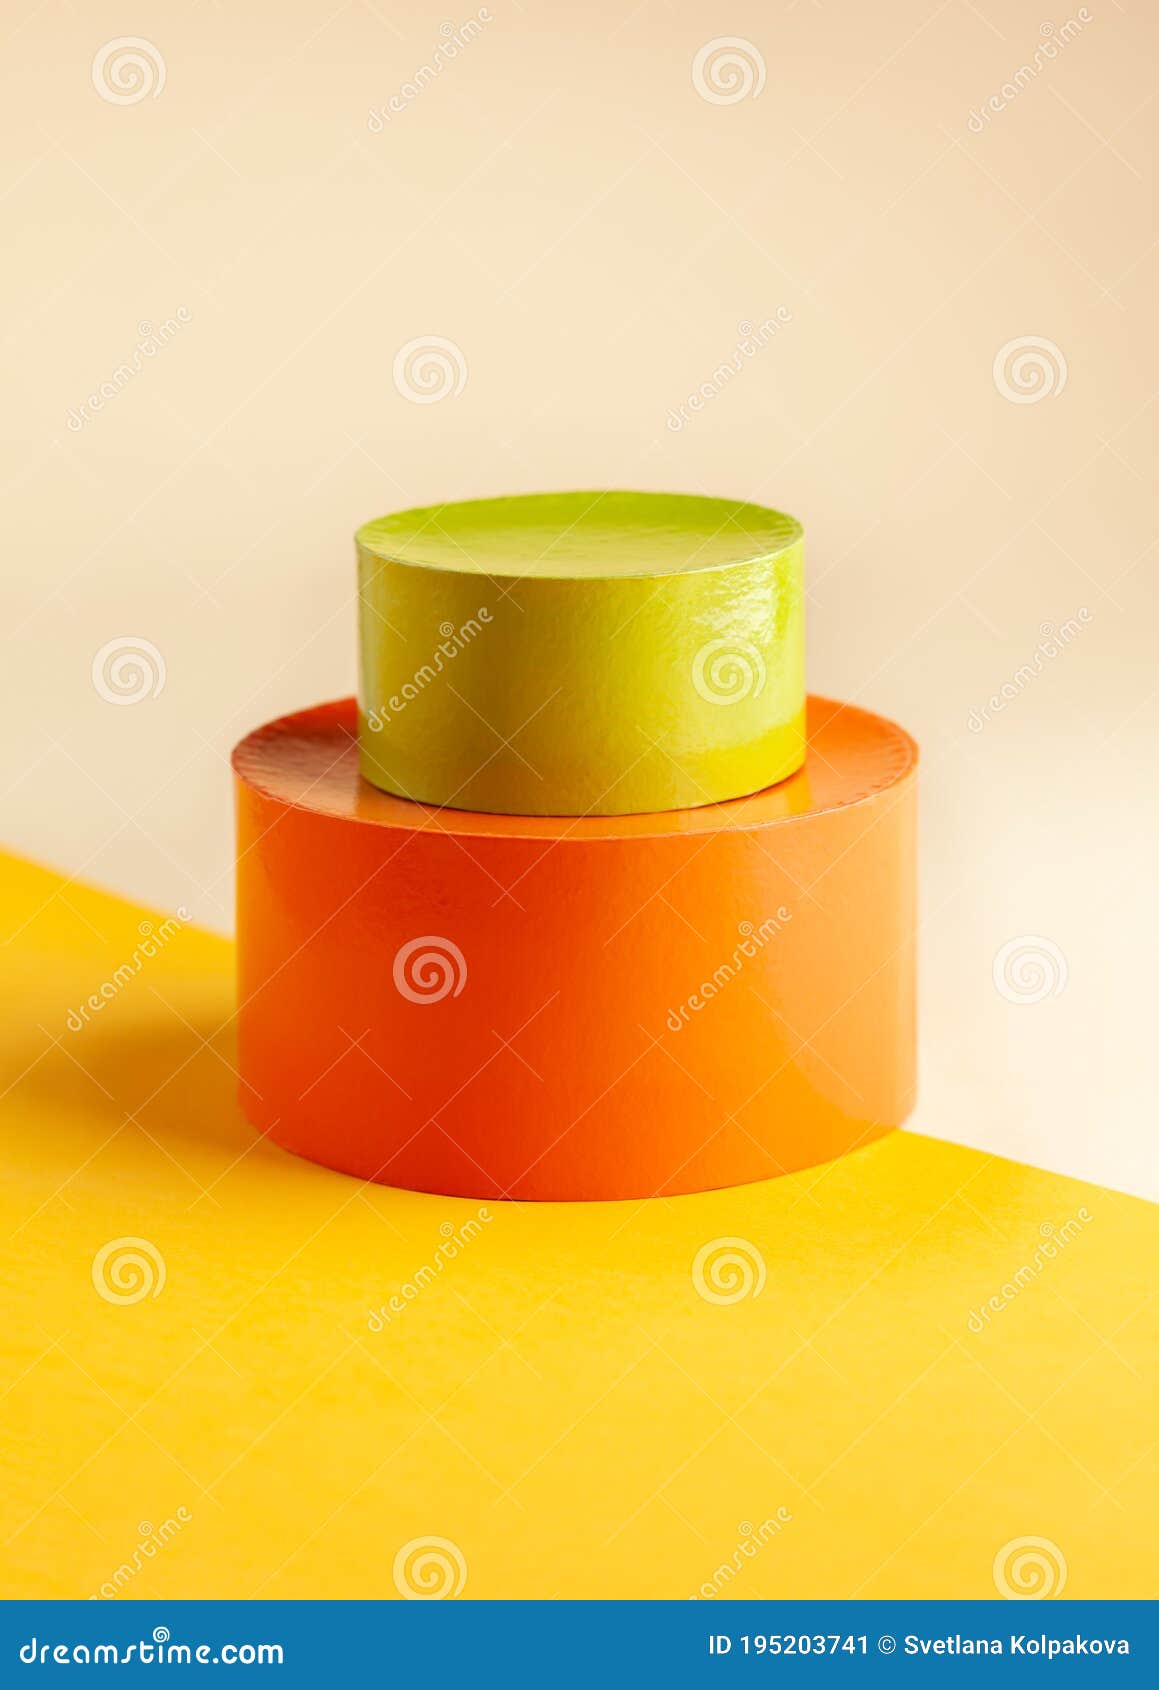 composition with empty circle  podiums for products presentation or exhibitions. abstract background of different colorful